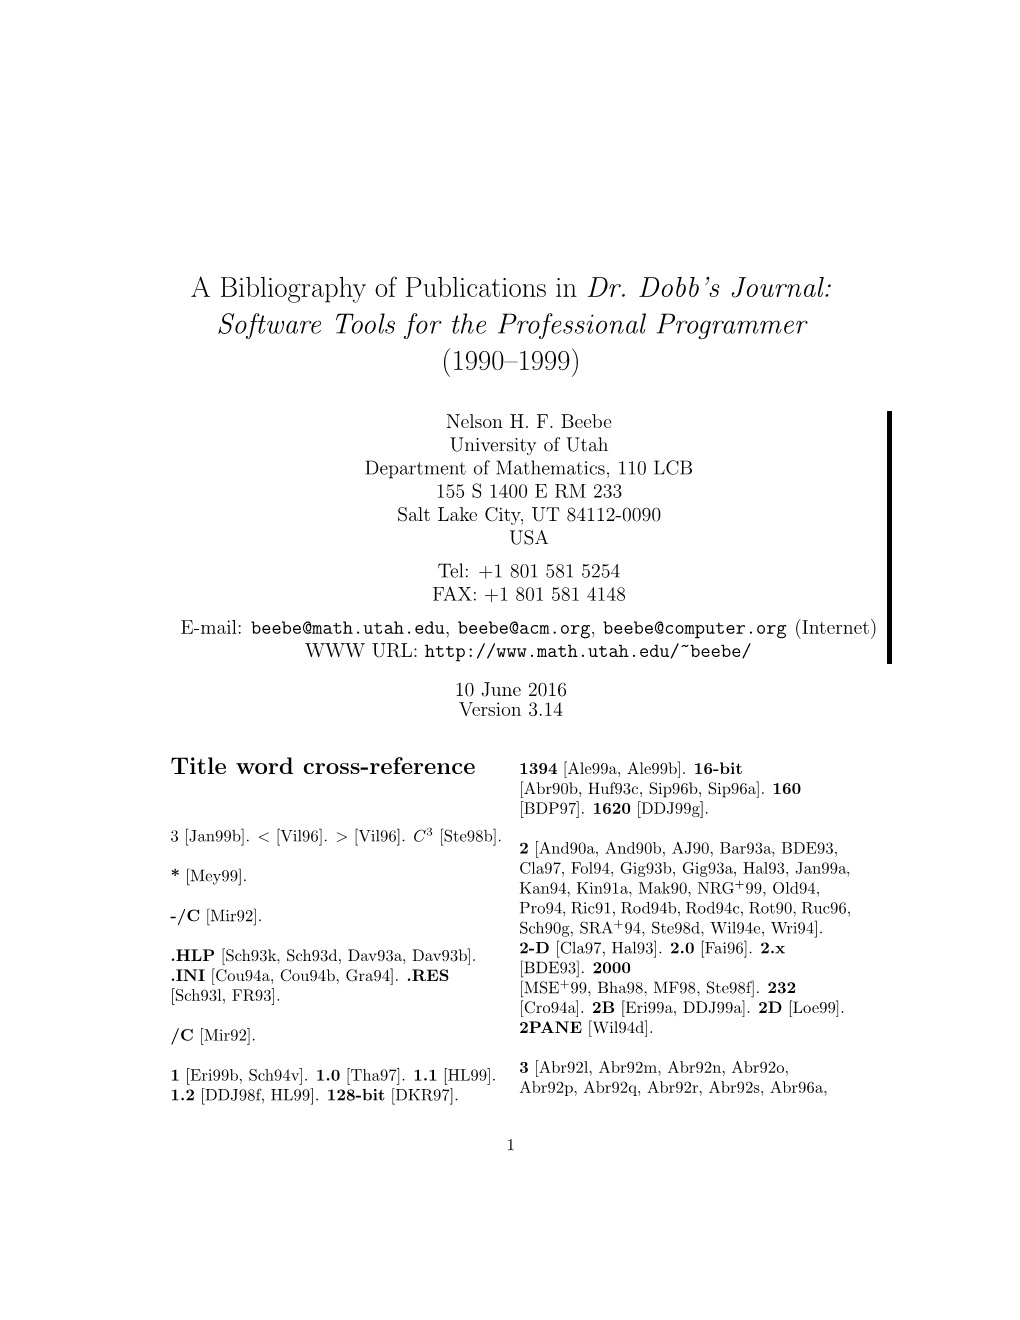 A Bibliography of Publications in Dr. Dobb's Journal